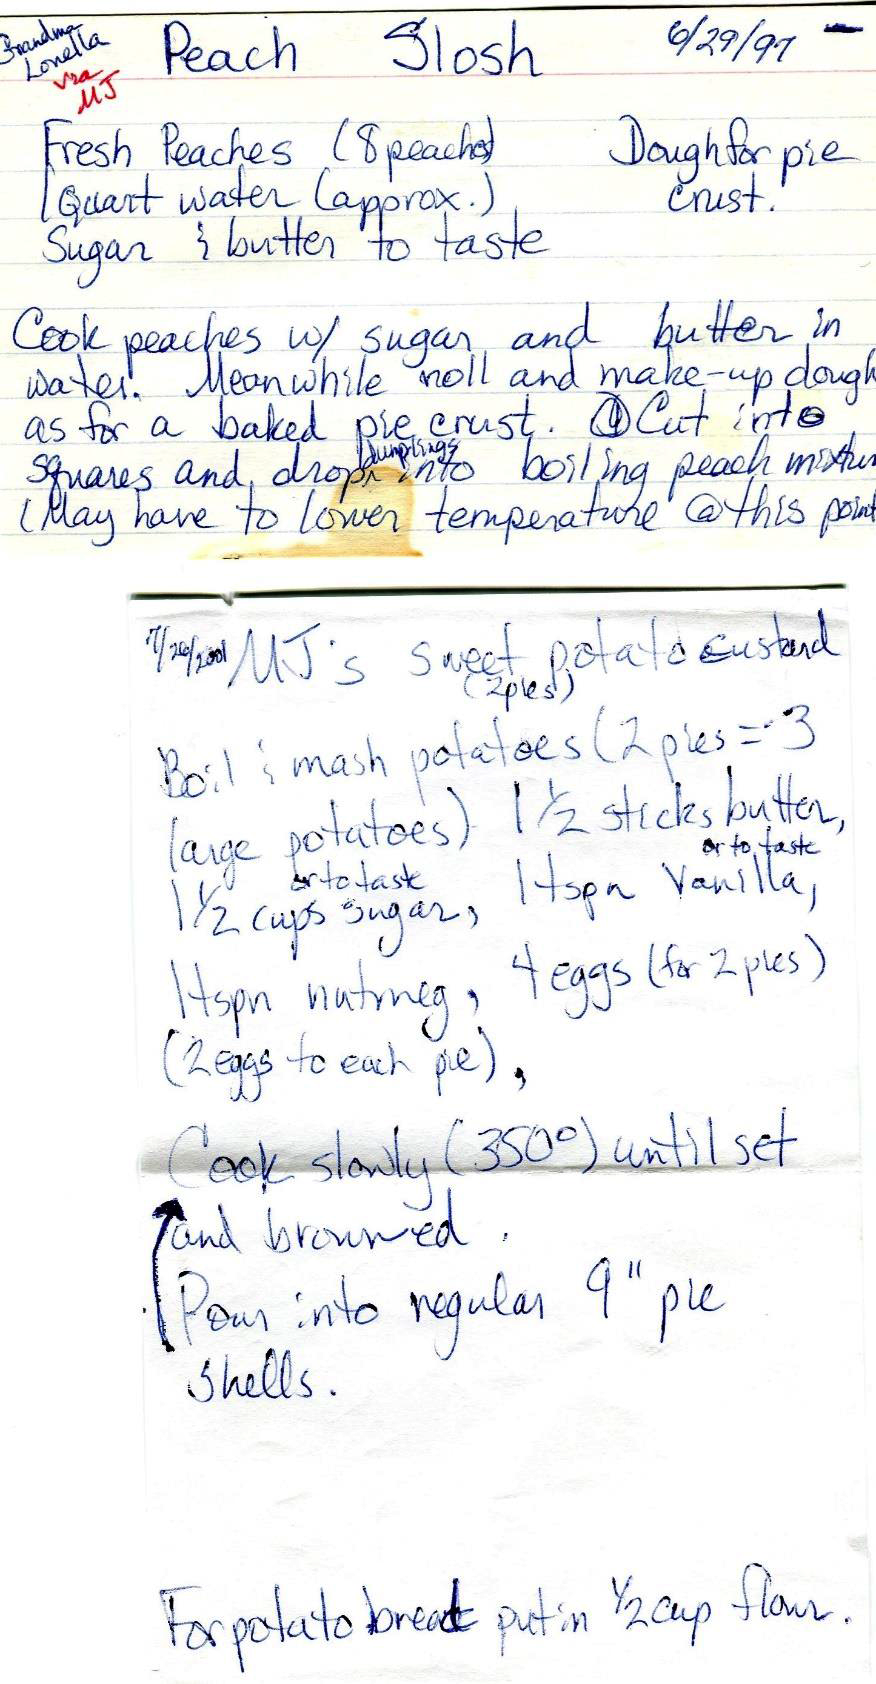 Handwritten recipe notes for MJ’s Peach Slosh and Sweet Potato Custard
                    Peach Slosh — 6/29/97
                    Grandma Louella via MJ
                    Fresh peaches (8 peaches)
                    1 quart water (approx.)
                    Sugar & butter to taste
                    Due for pie crust
                    Cook peaches with sugar and butter in water. Meanwhile, roll and make-up dough as for a baked pie crust. Cut into squares and drop dumplings into boiling peach mixture. (May have to lower temperature at this point.)
                    MJ’s Sweet Potato Custard — 7/26/2001 (2 pies)
                    Boil & mash potatoes (2 pies=3 large potatoes)
                    1 ½ sticks butter
                    1 ½ cups sugar (or to taste)
                    1 tspn vanilla (or to taste)
                    1 tspn nutmeg
                    4 eggs for 2 pies (2 eggs each pie)
                    Pour into regular 9 inch pie shells.
                    Cook slowly (350°) until set and browned.
                    For potato bread put in ½ cup flour.